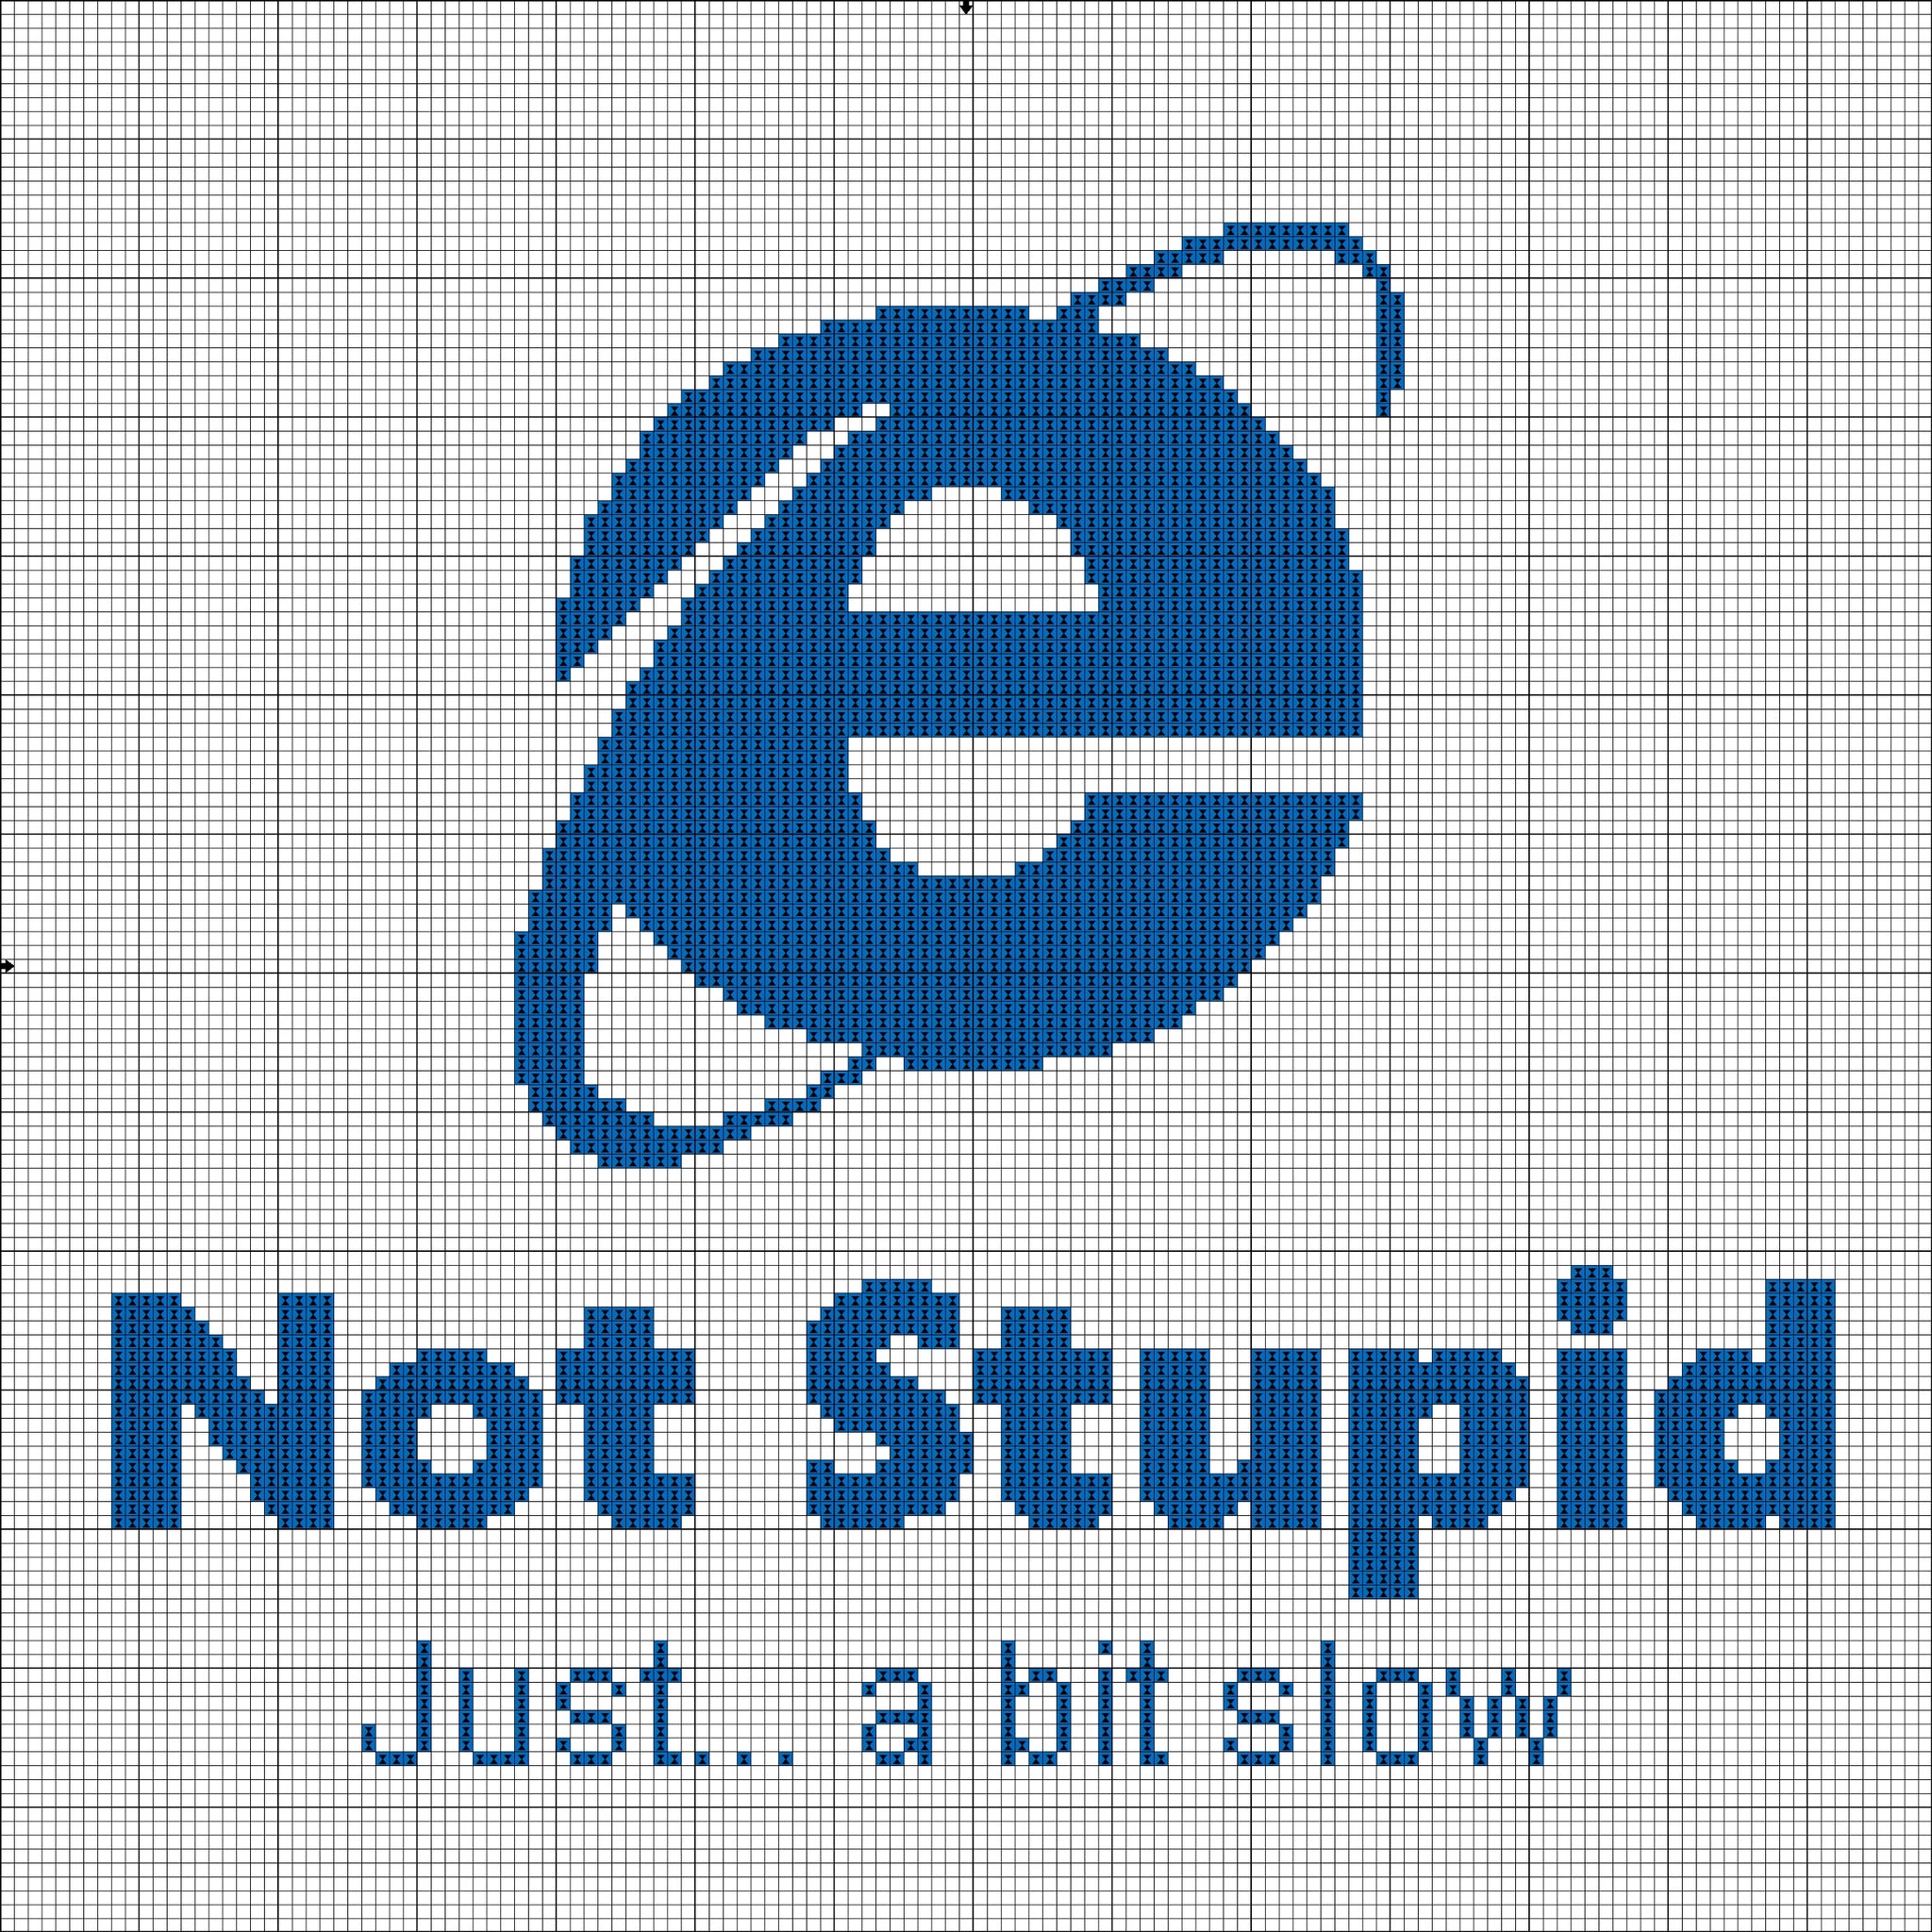 Internet funny sarcastic quote free cross stitch embroidery pattern